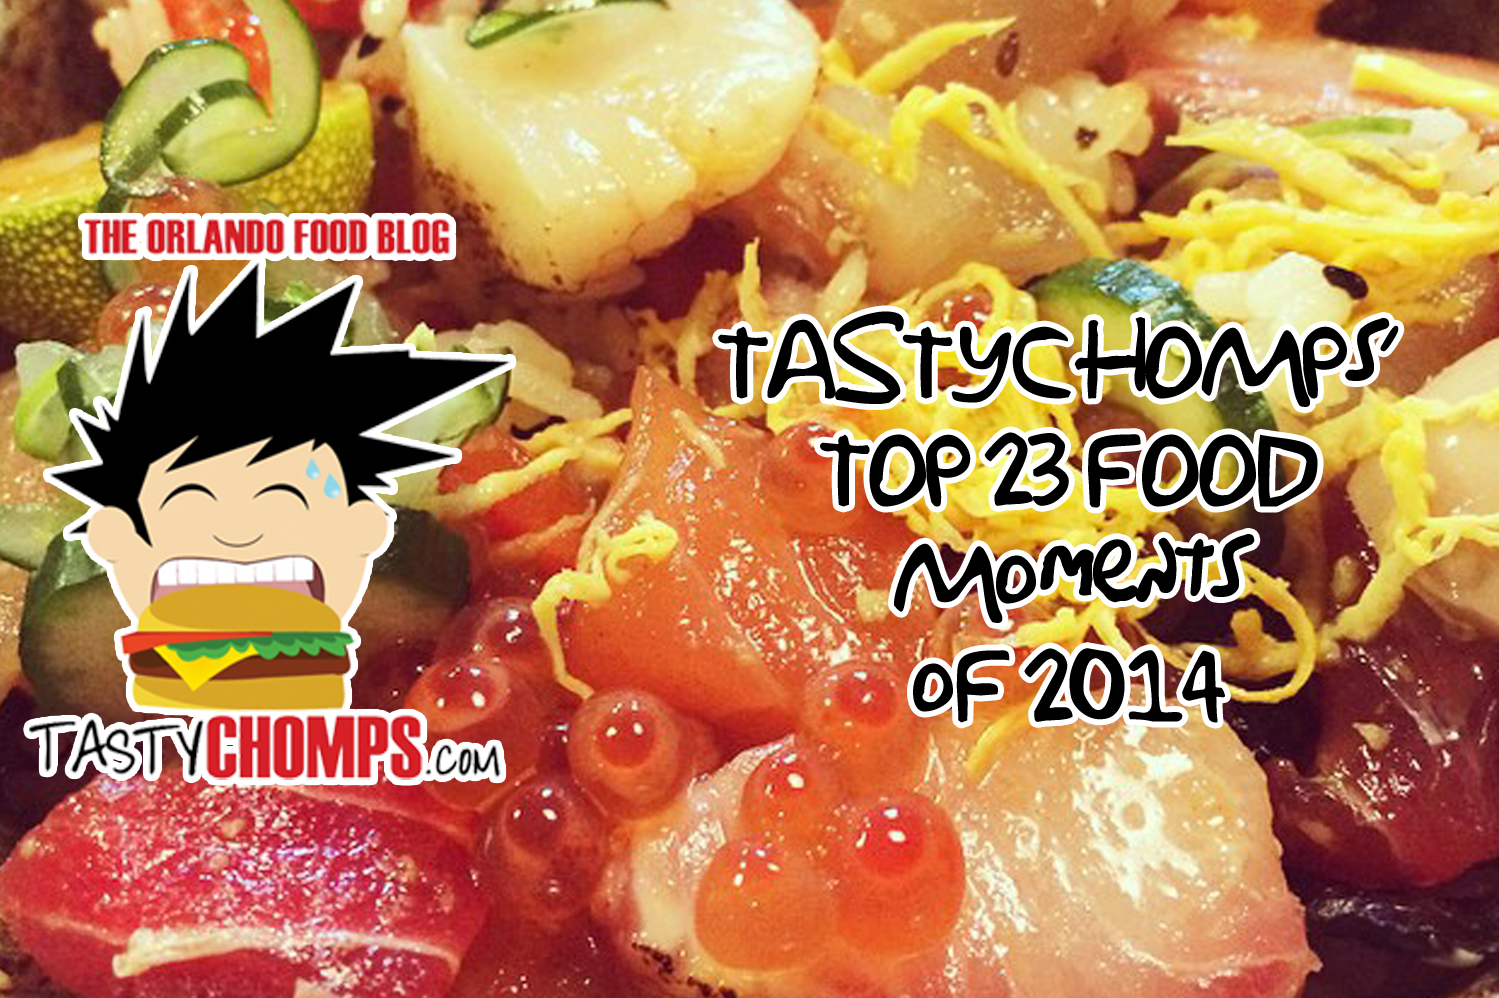 Top 23 Favorite Food Moments and Restaurants of 2014